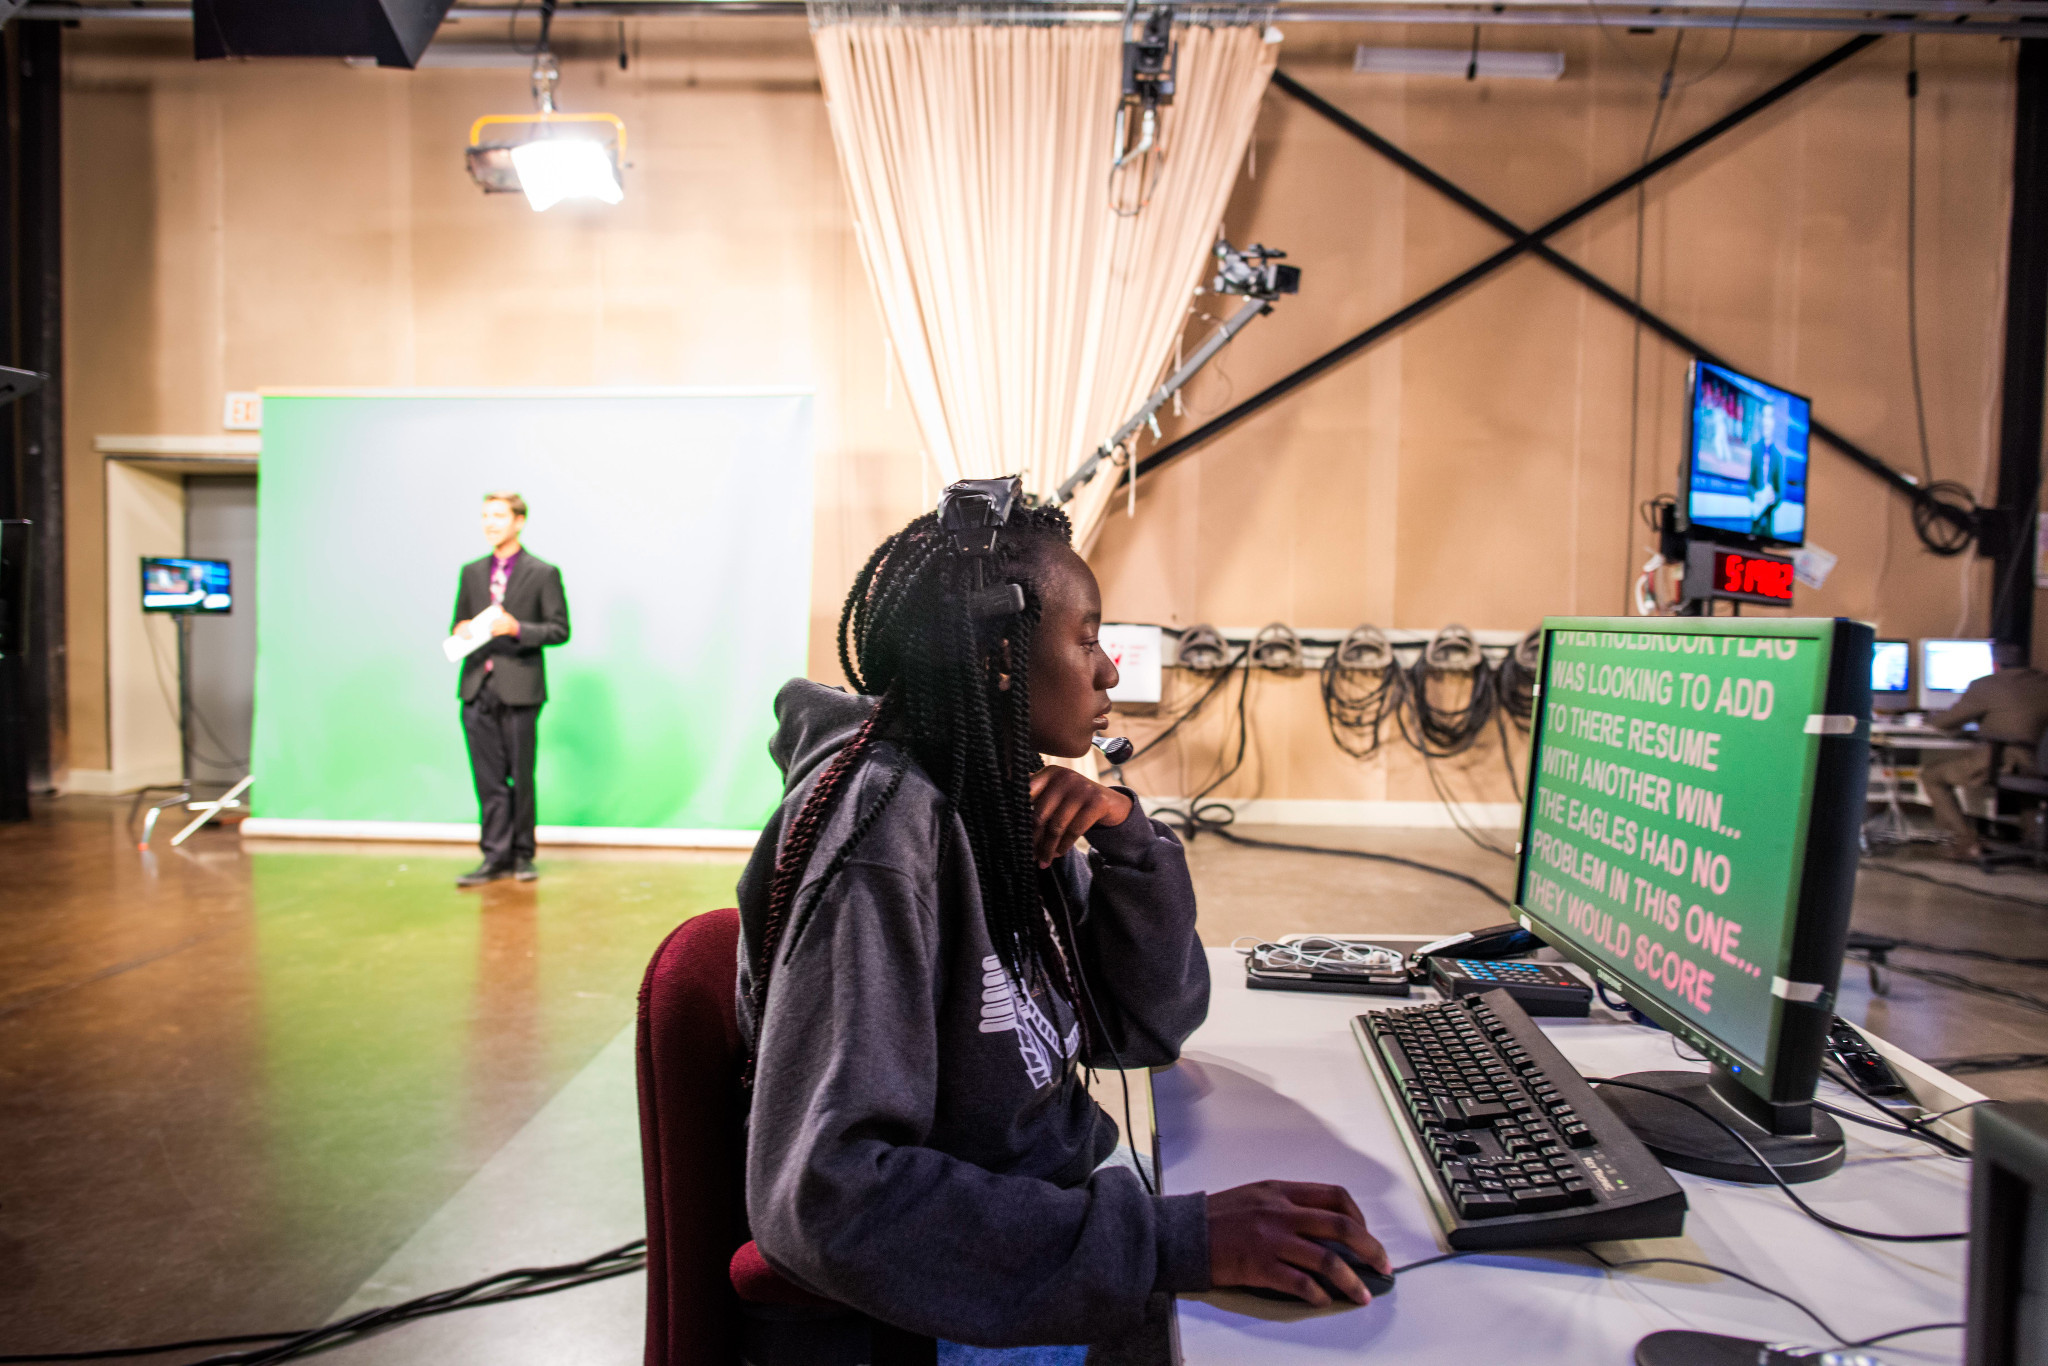 Student with a headset using a computer while TV production with another student infront of a green screen in the background.